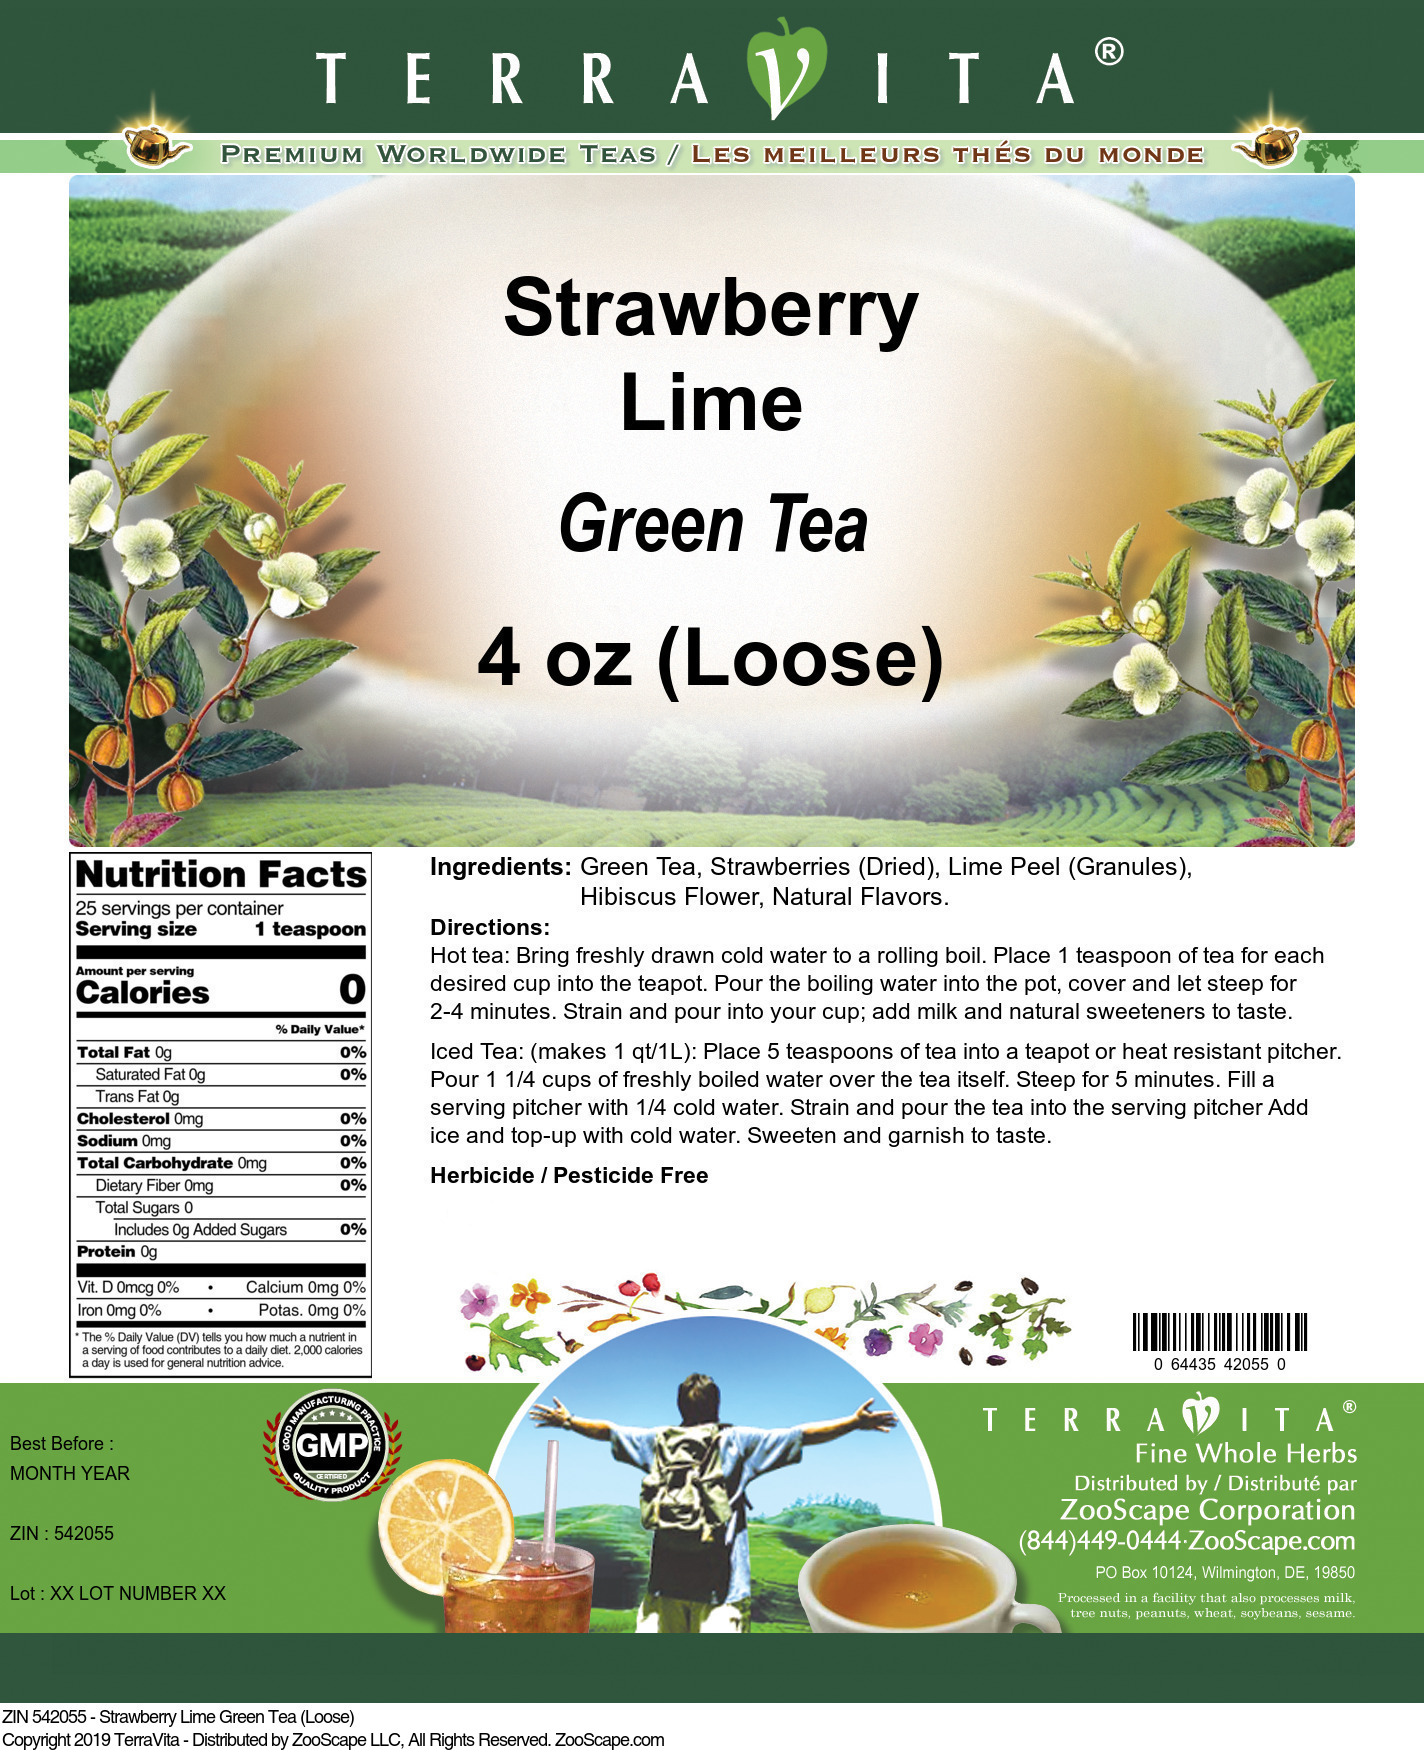 Strawberry Lime Green Tea (Loose) - Label